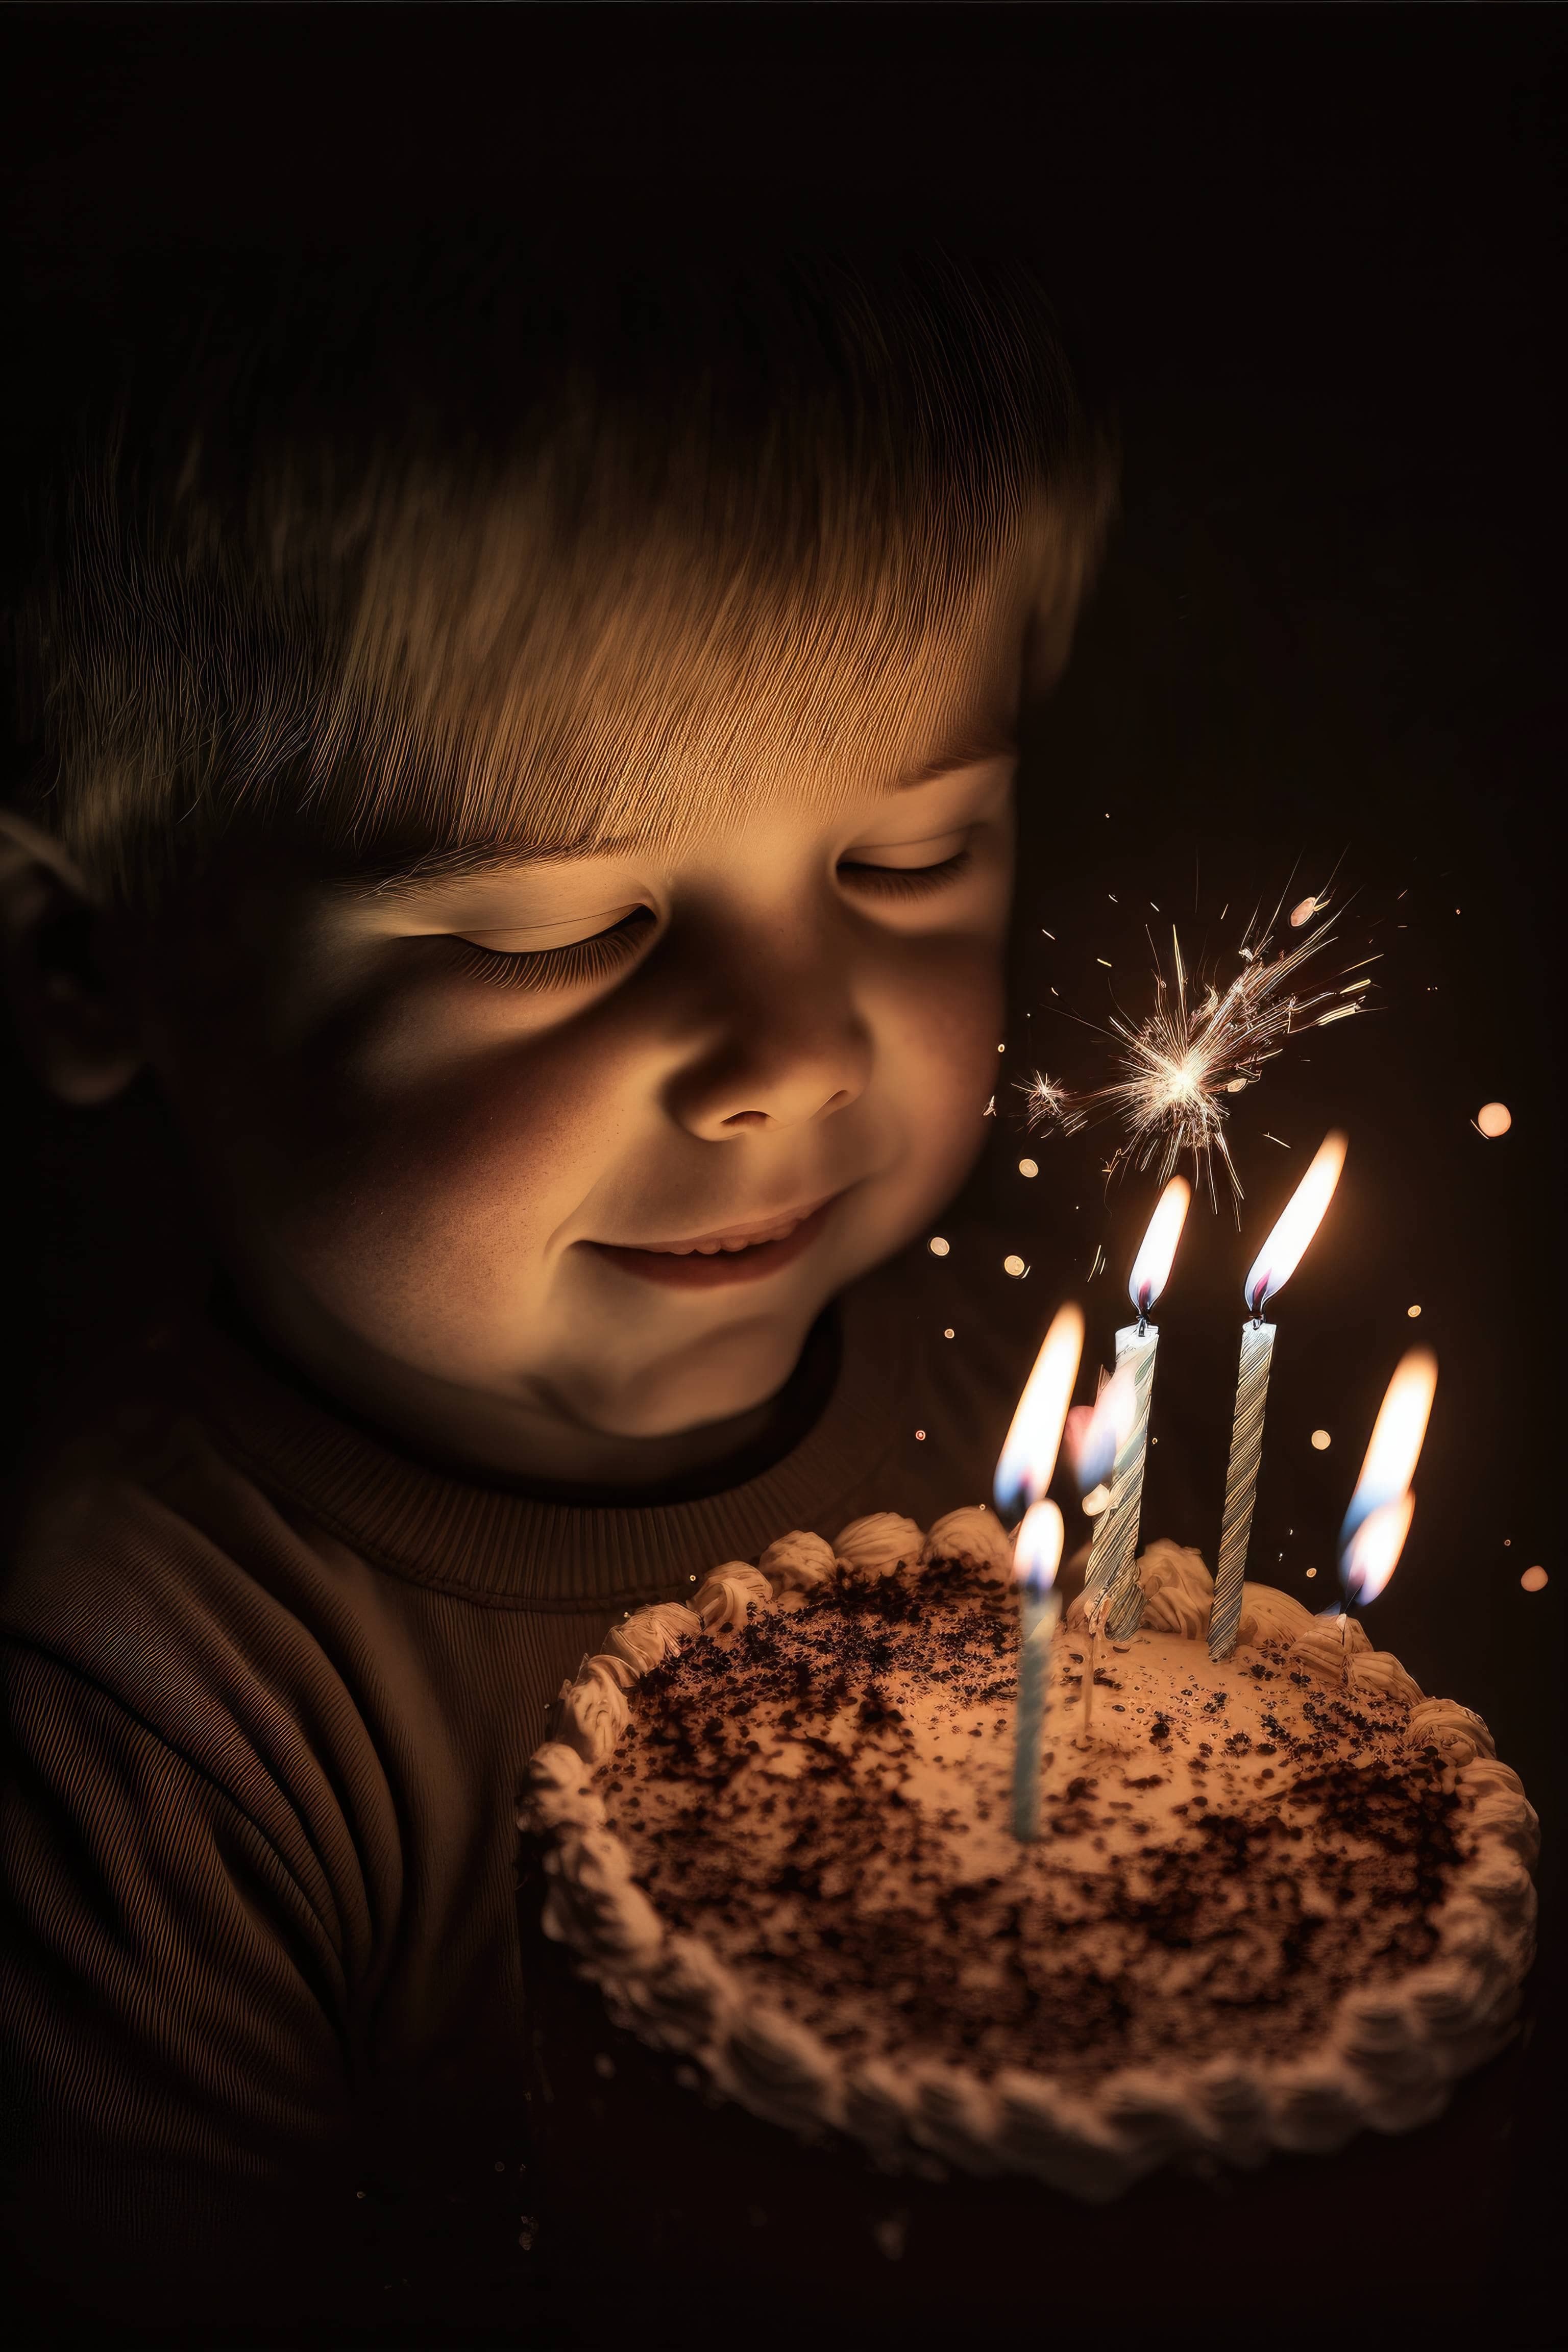 A picture of a person blowing out candles on a birthday cake.